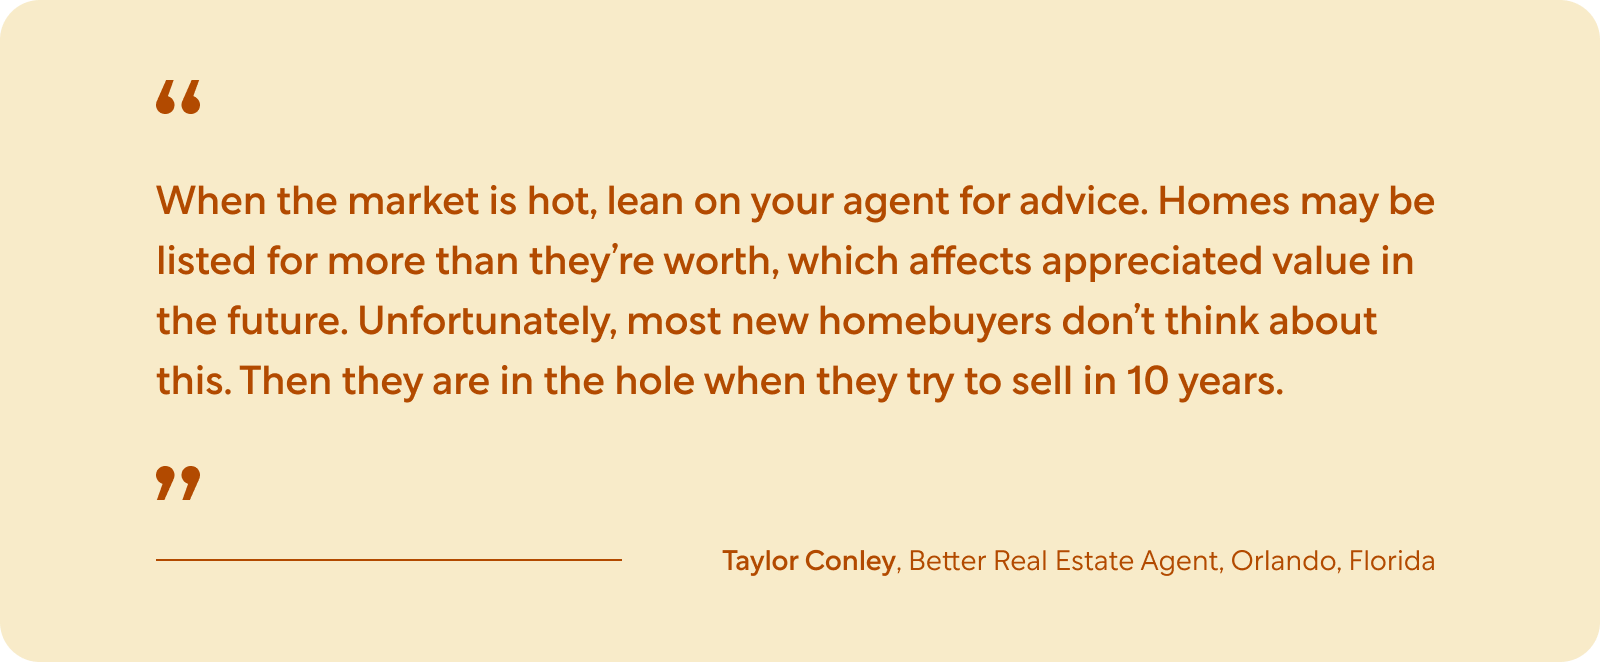 Quote from Taylor Conley, Better Real Estate Agent from Orlando, Florida